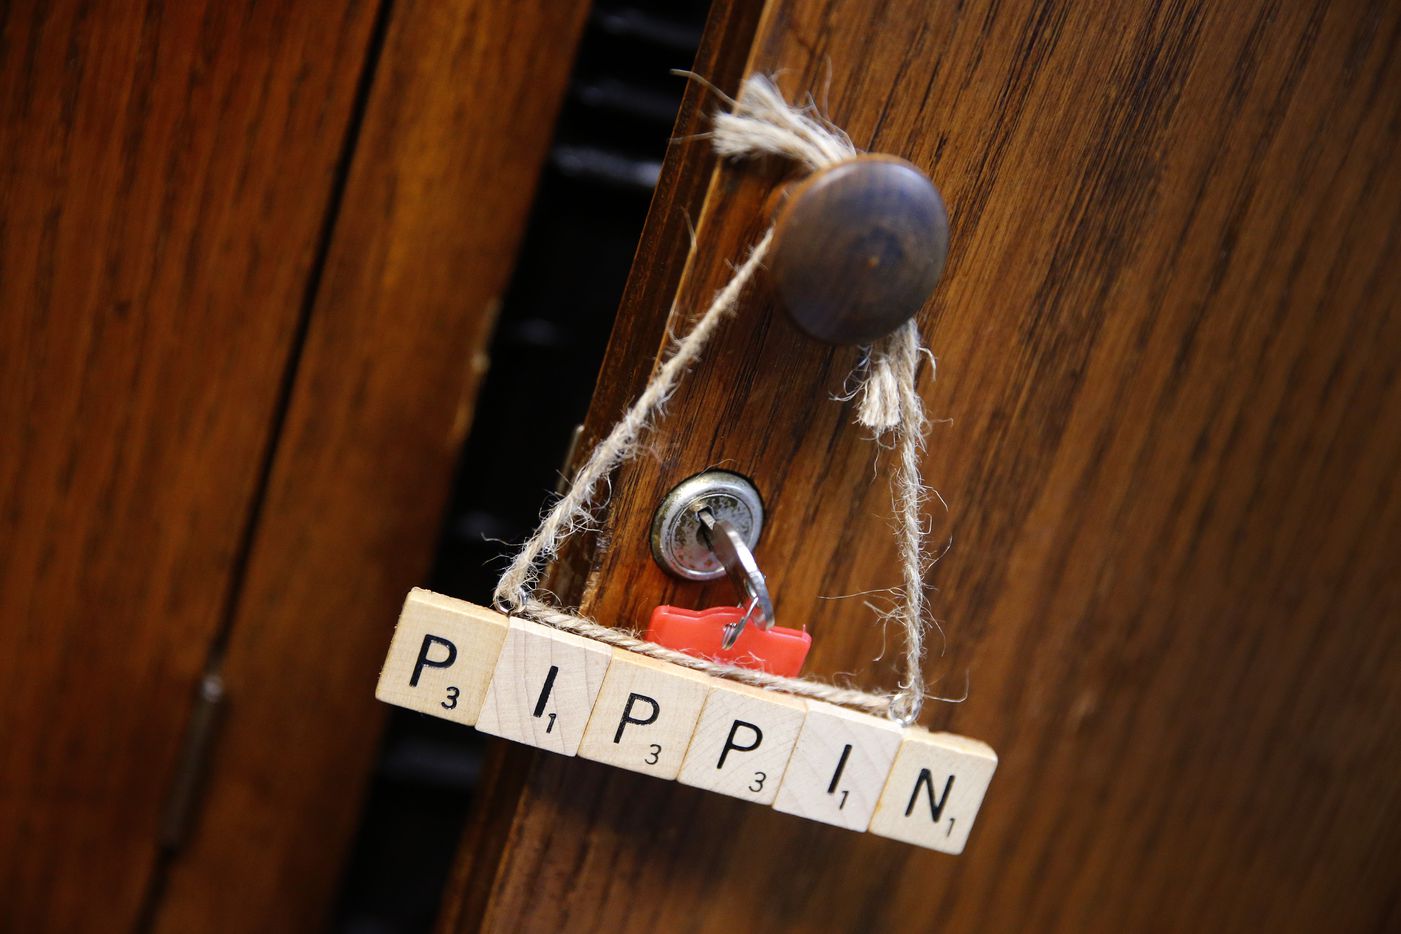 A Scrabble-lettered tag for Pippin hangs from a storage cabinet handle at The Firehouse...